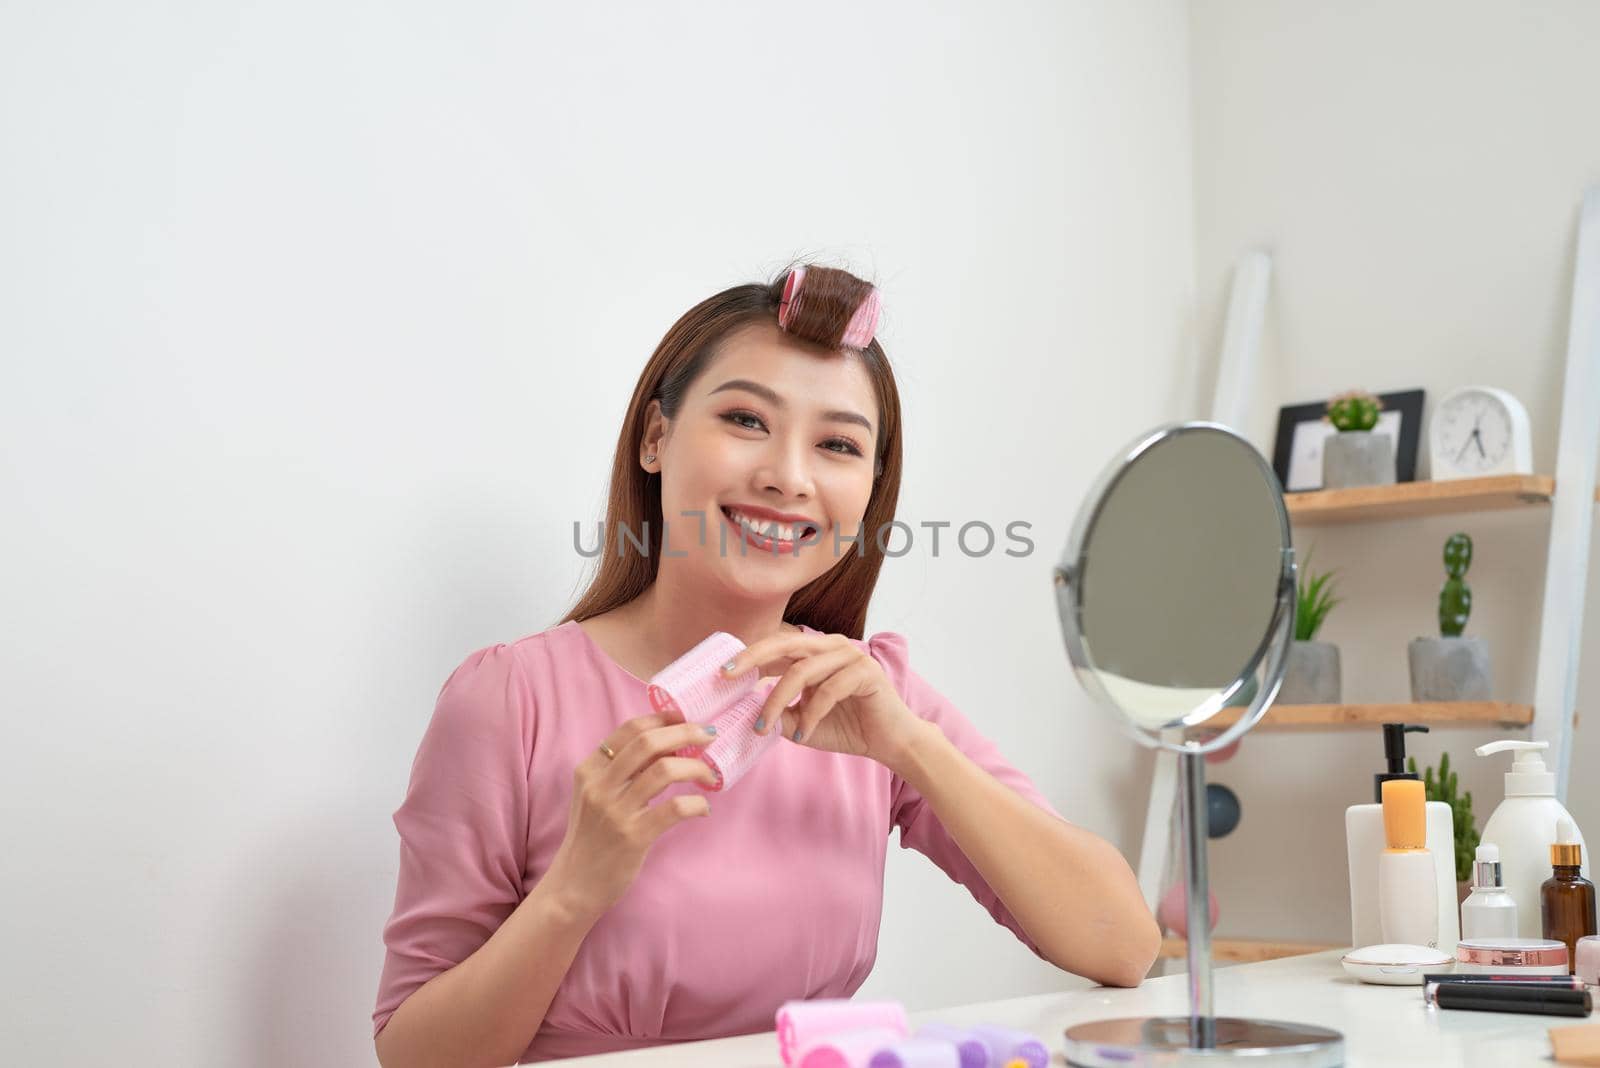 Head and shoulders portrait of beautiful Asian woman wearing hair curlers looking in mirror with wide smile, home interior on background